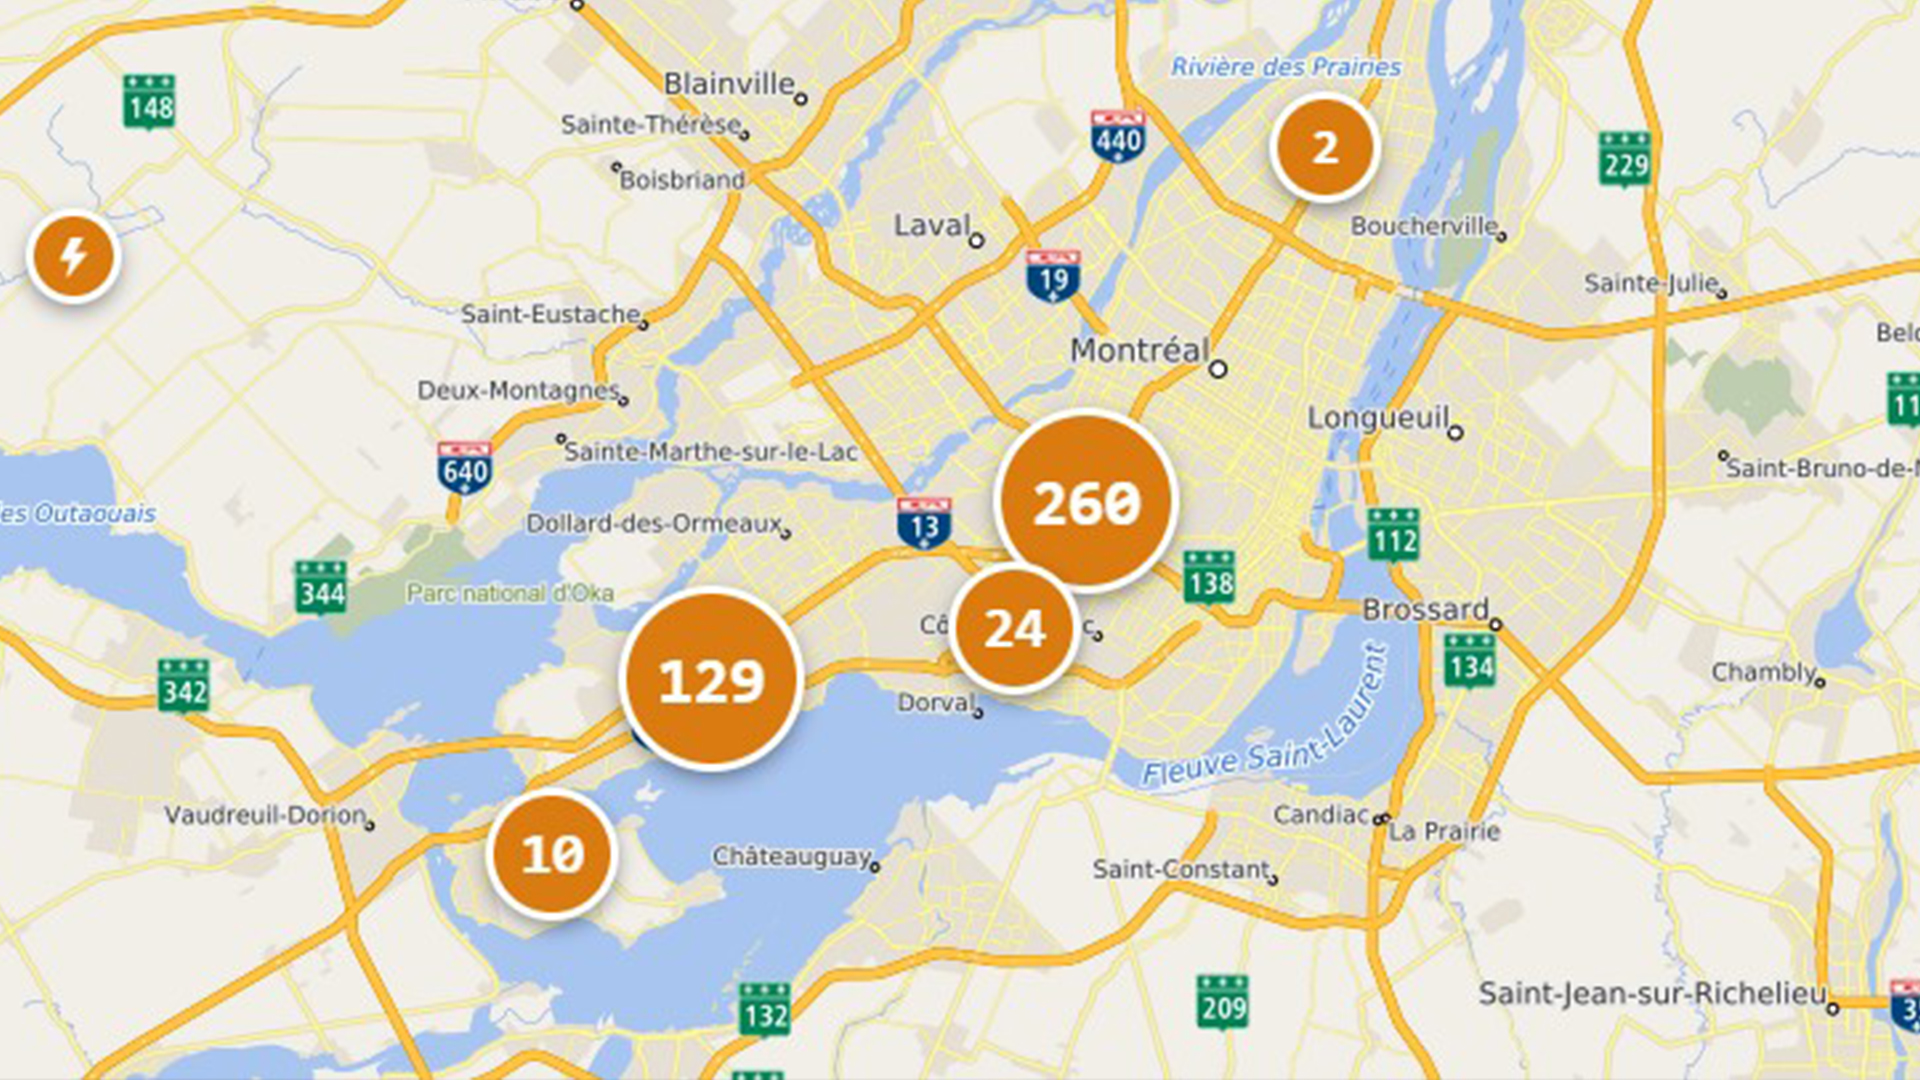 Thousands of Hydro-Quebec customers without power in Montreal: Major outage nears completion